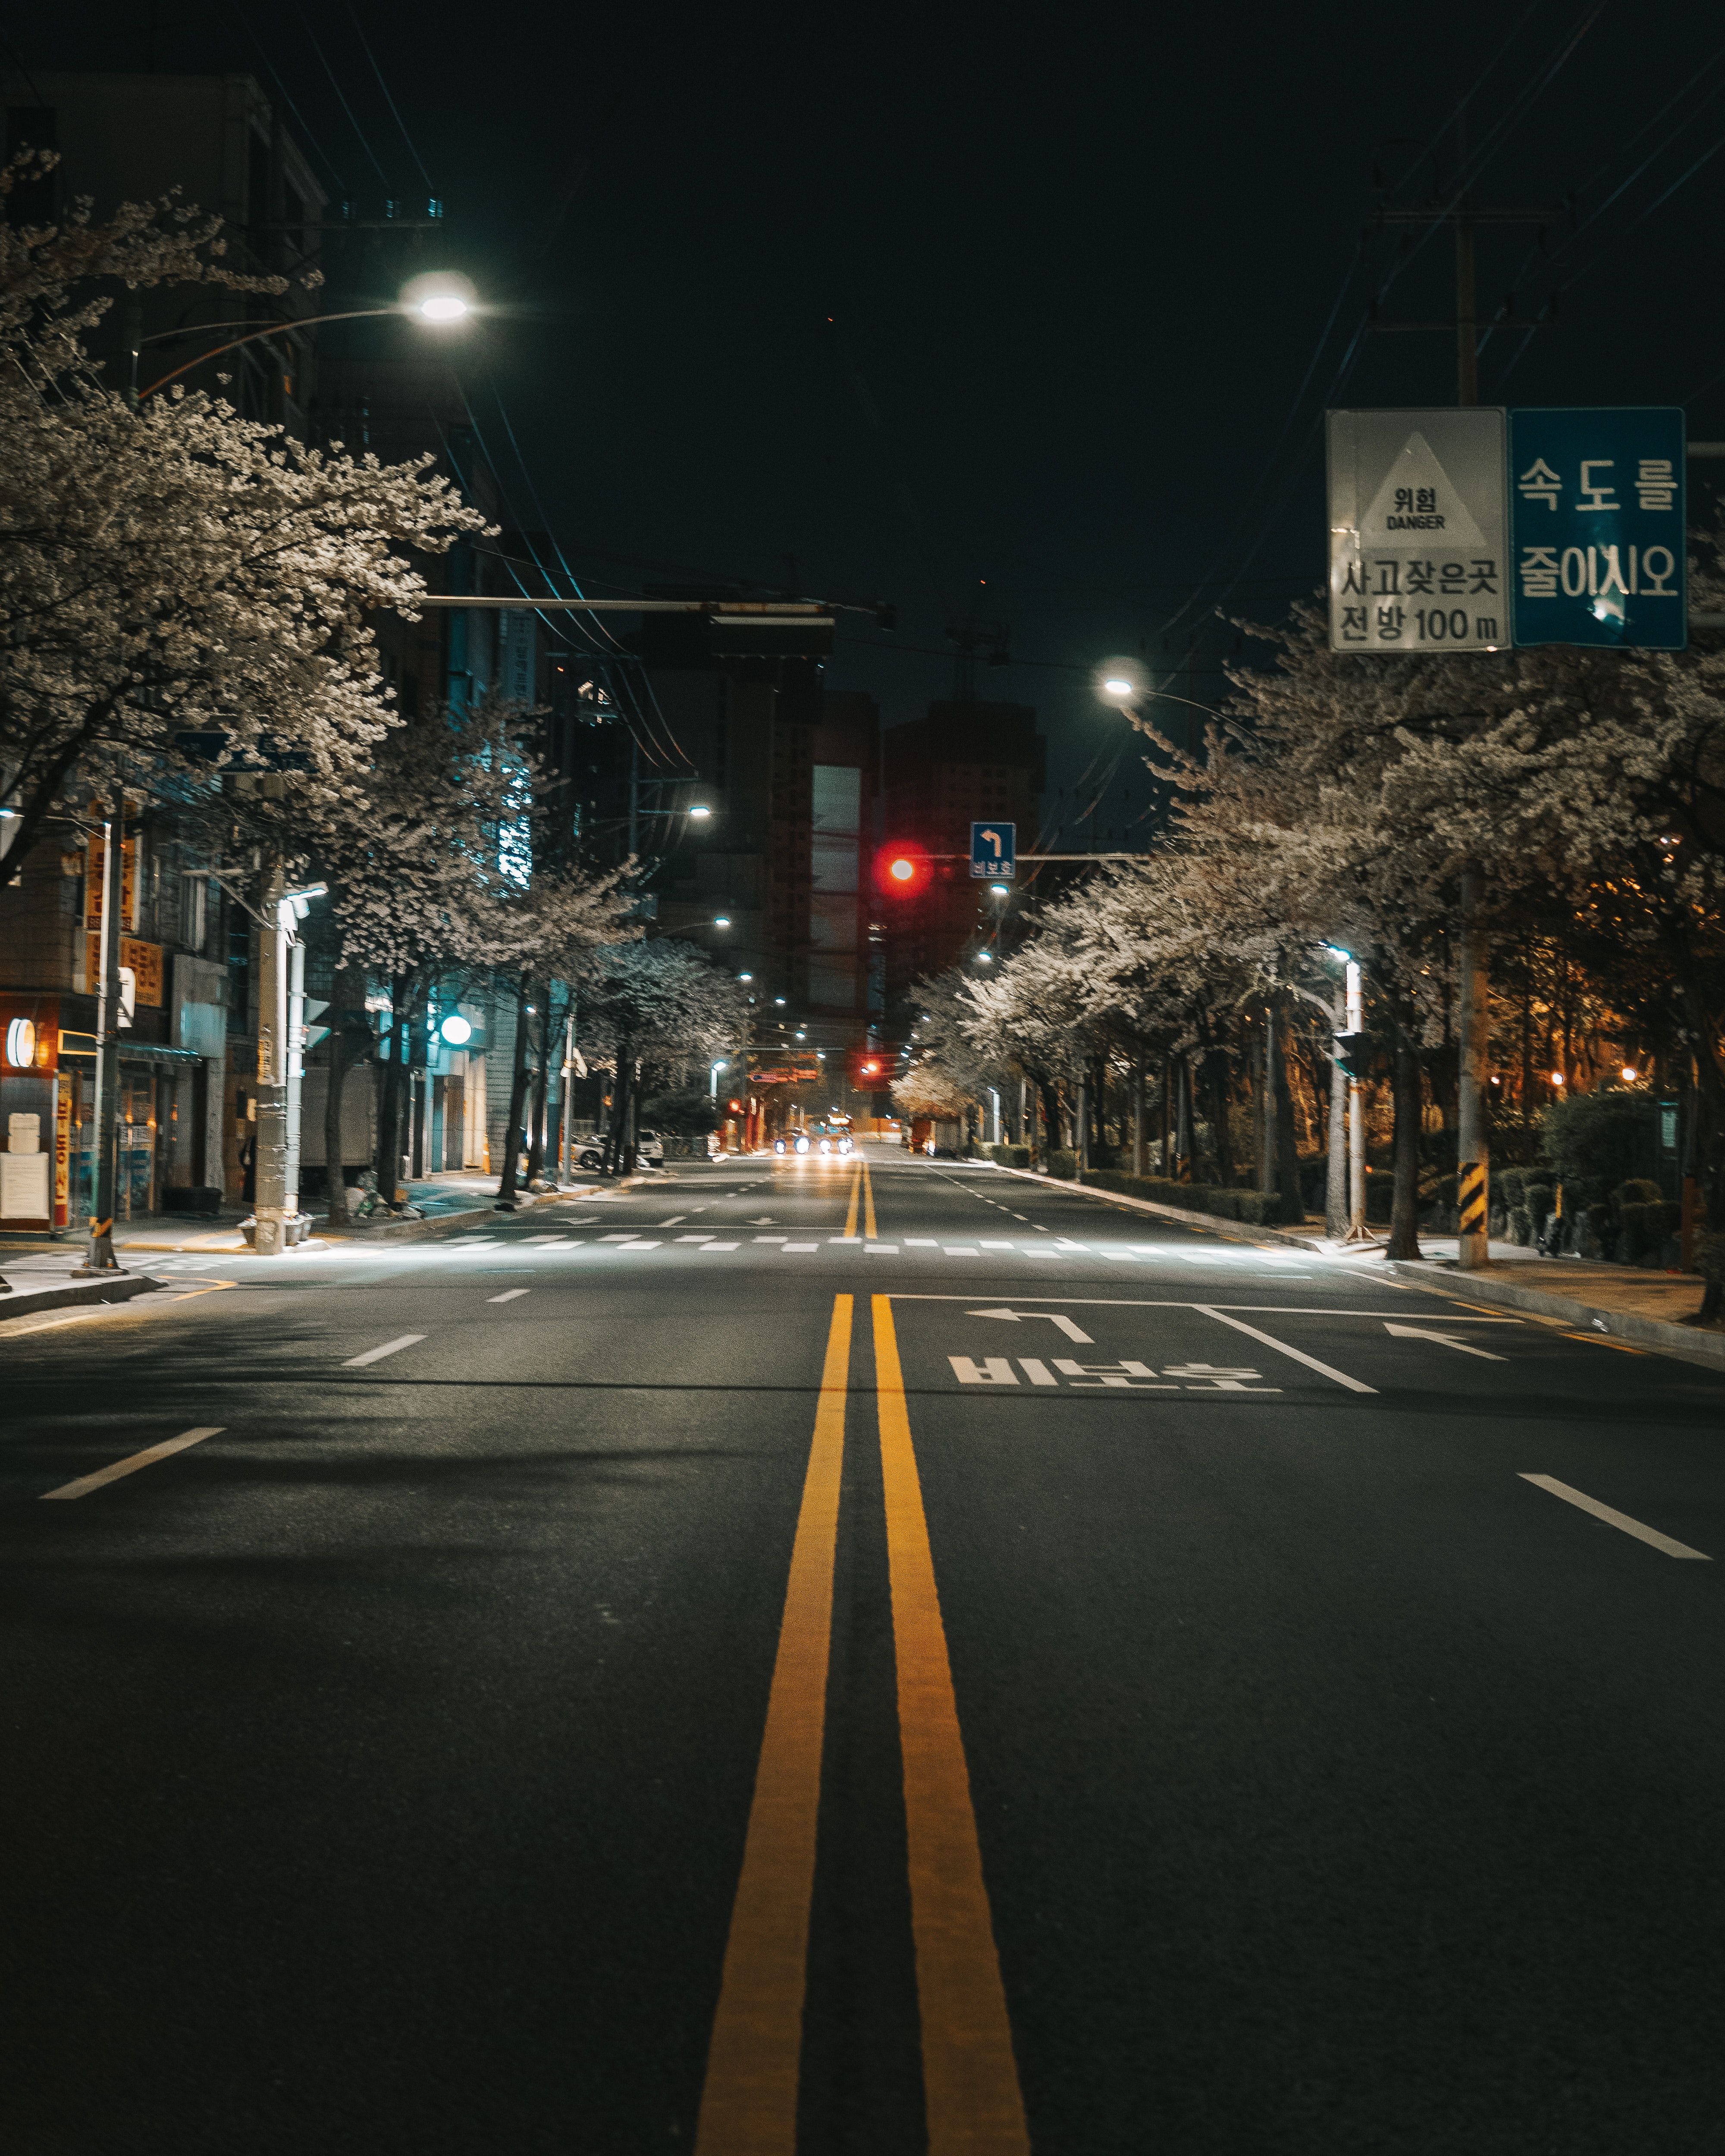 A city street at night with traffic lights and trees lining the street. - Seoul